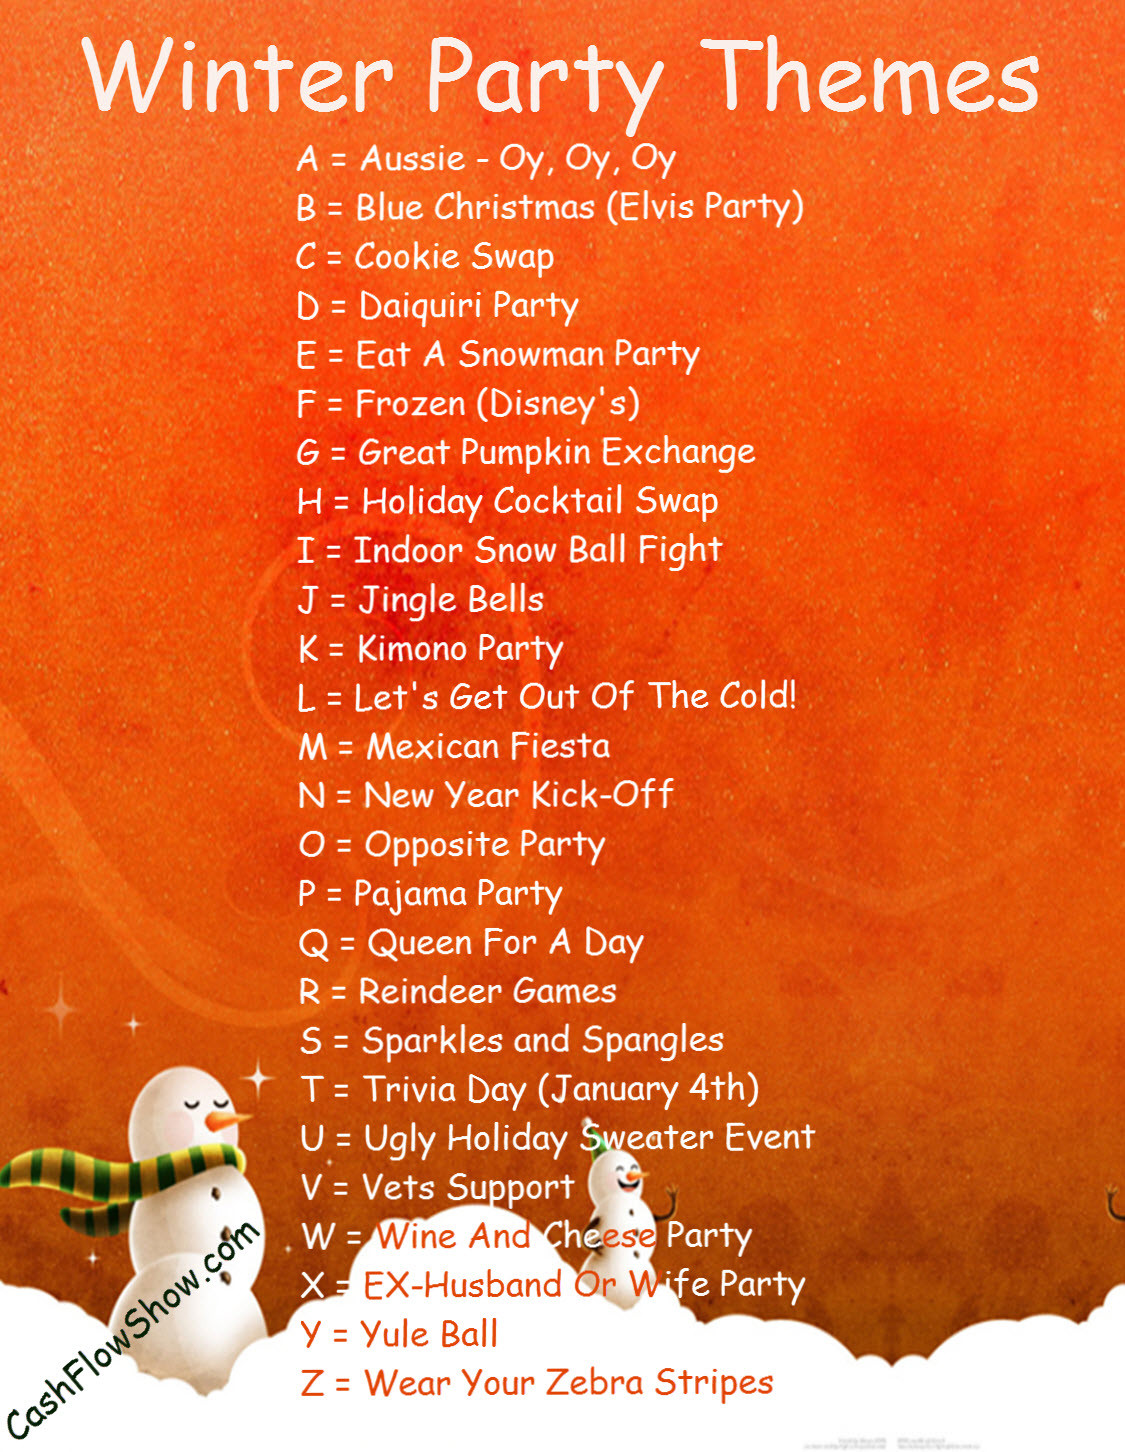 Holiday Party Name Ideas
 Read A Z List To Find A Winter Party Theme For Your Event